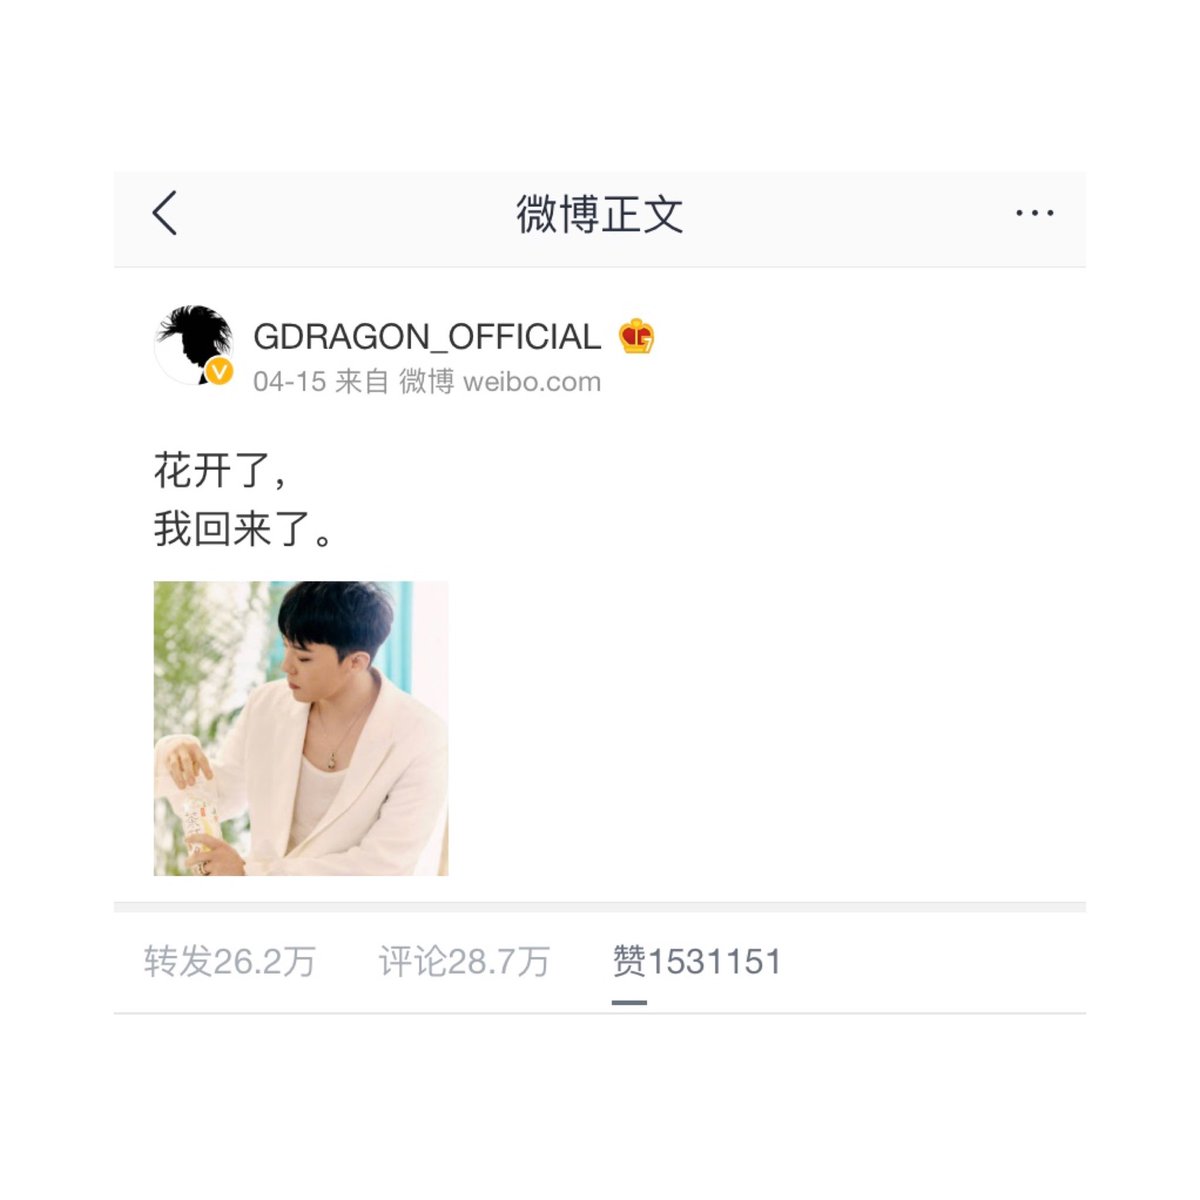 G-Dragon is the first korean artist to reach 1.5M+ likes on a post in Weibo history. It's also the fastest post by a korean artist to reach 1M likes (in less than 12 hours).